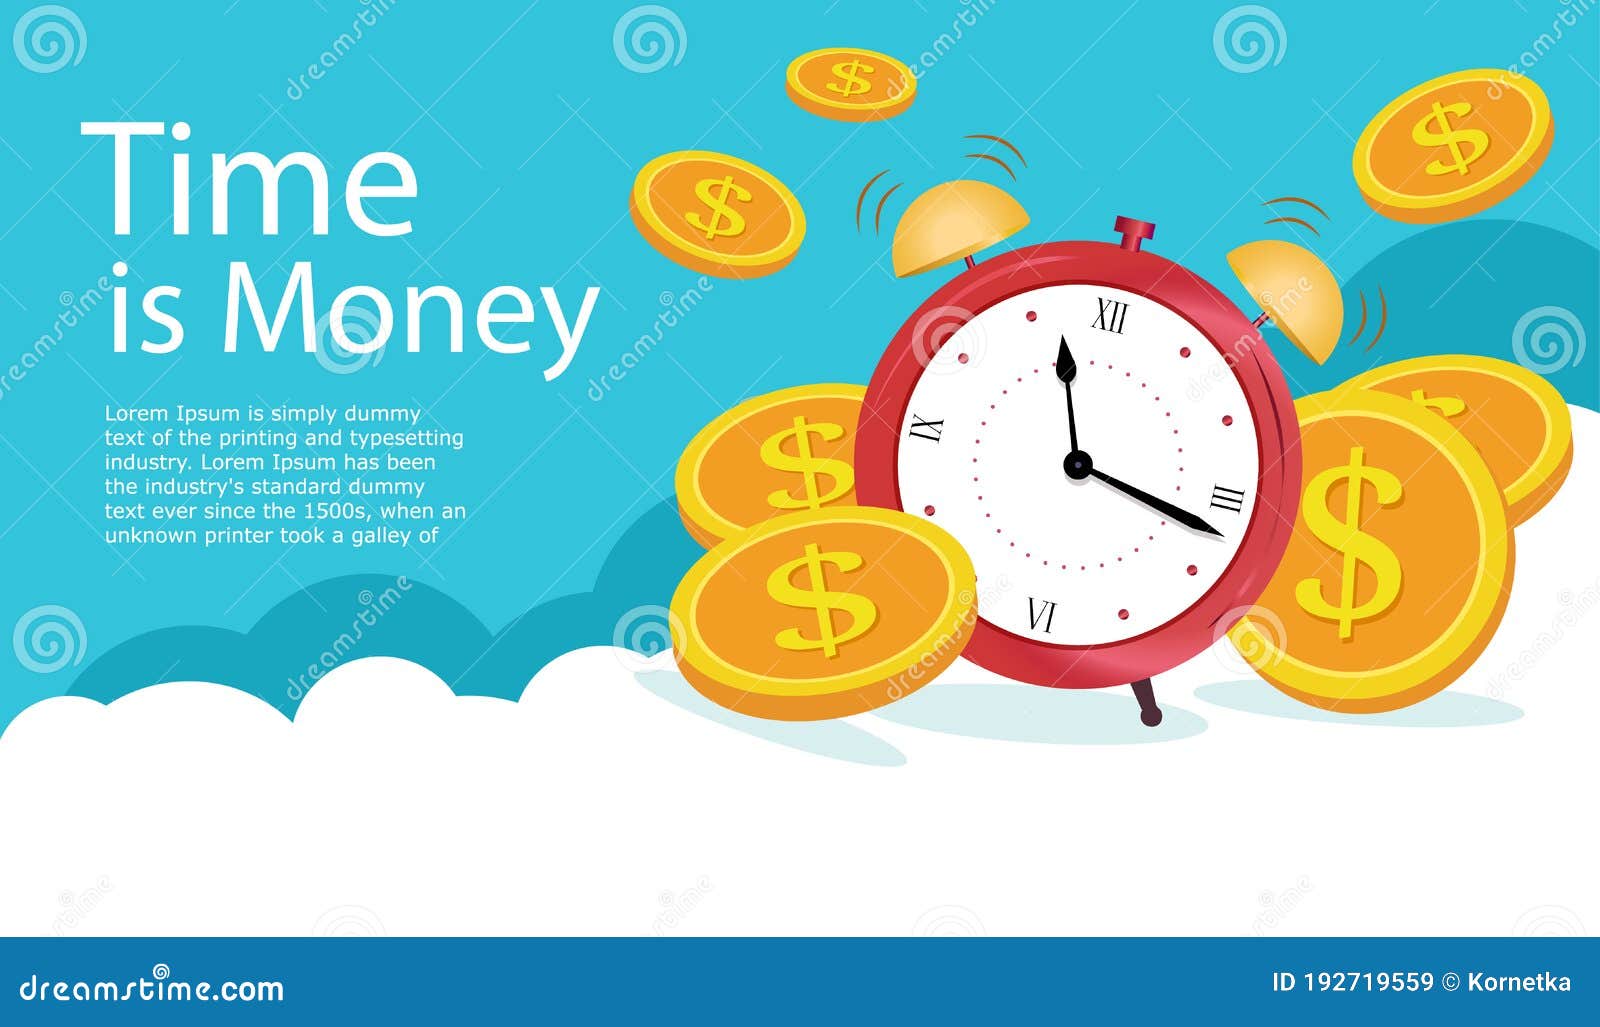 Site Time Is Money On Clouds Landing Page Business And Finance Management Stock Vector Illustration Of Benefit Deposit 192719559